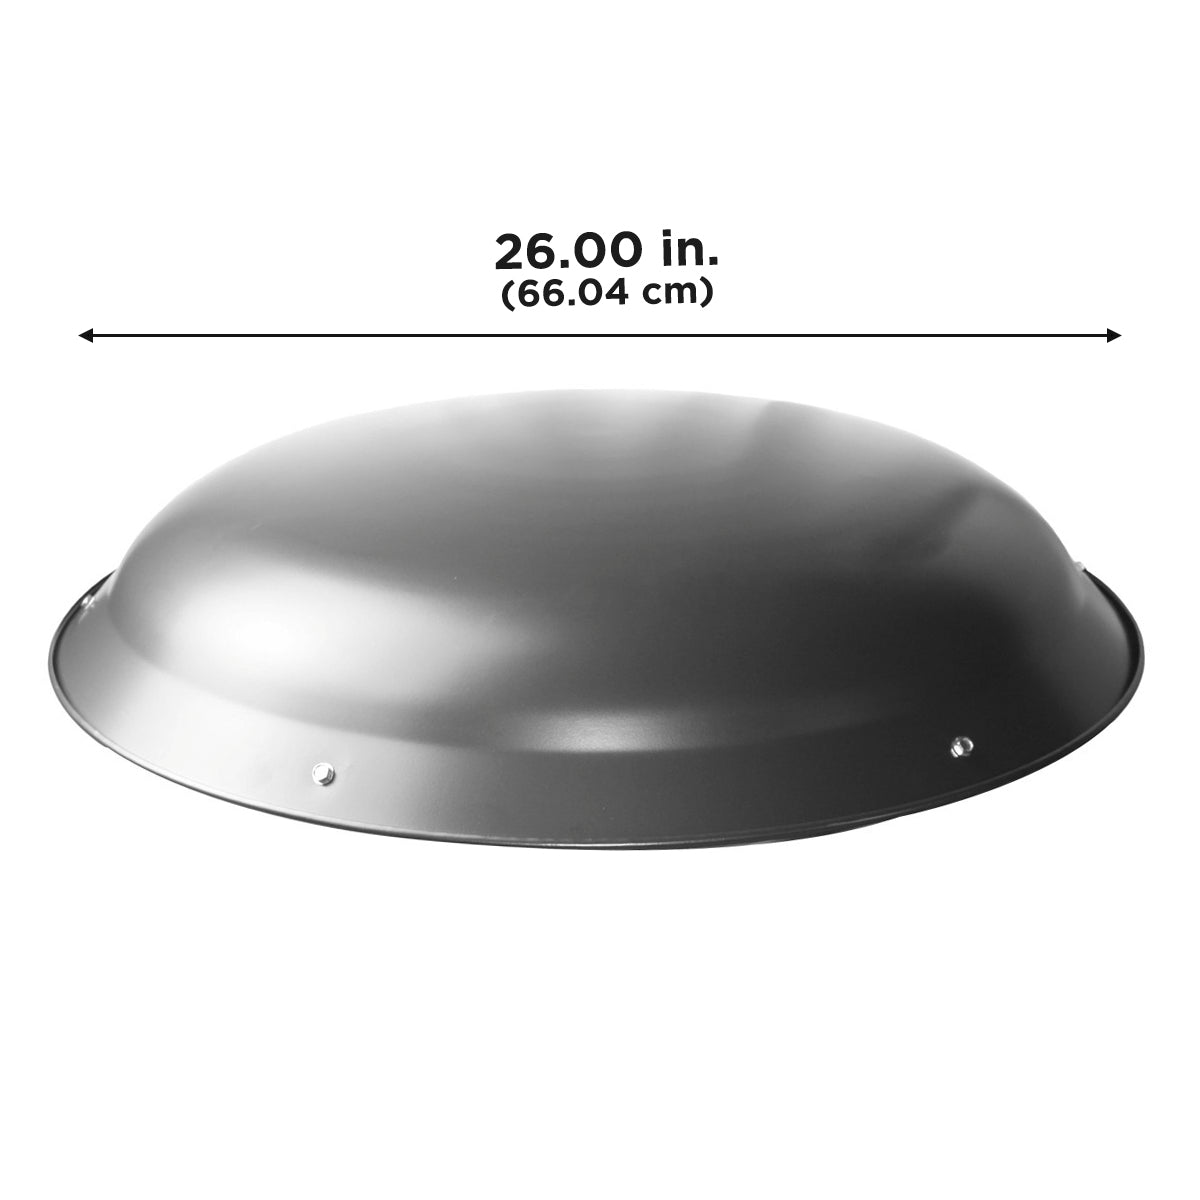 Dimensional drawing showing the aluminum dome's 26 inch diameter.